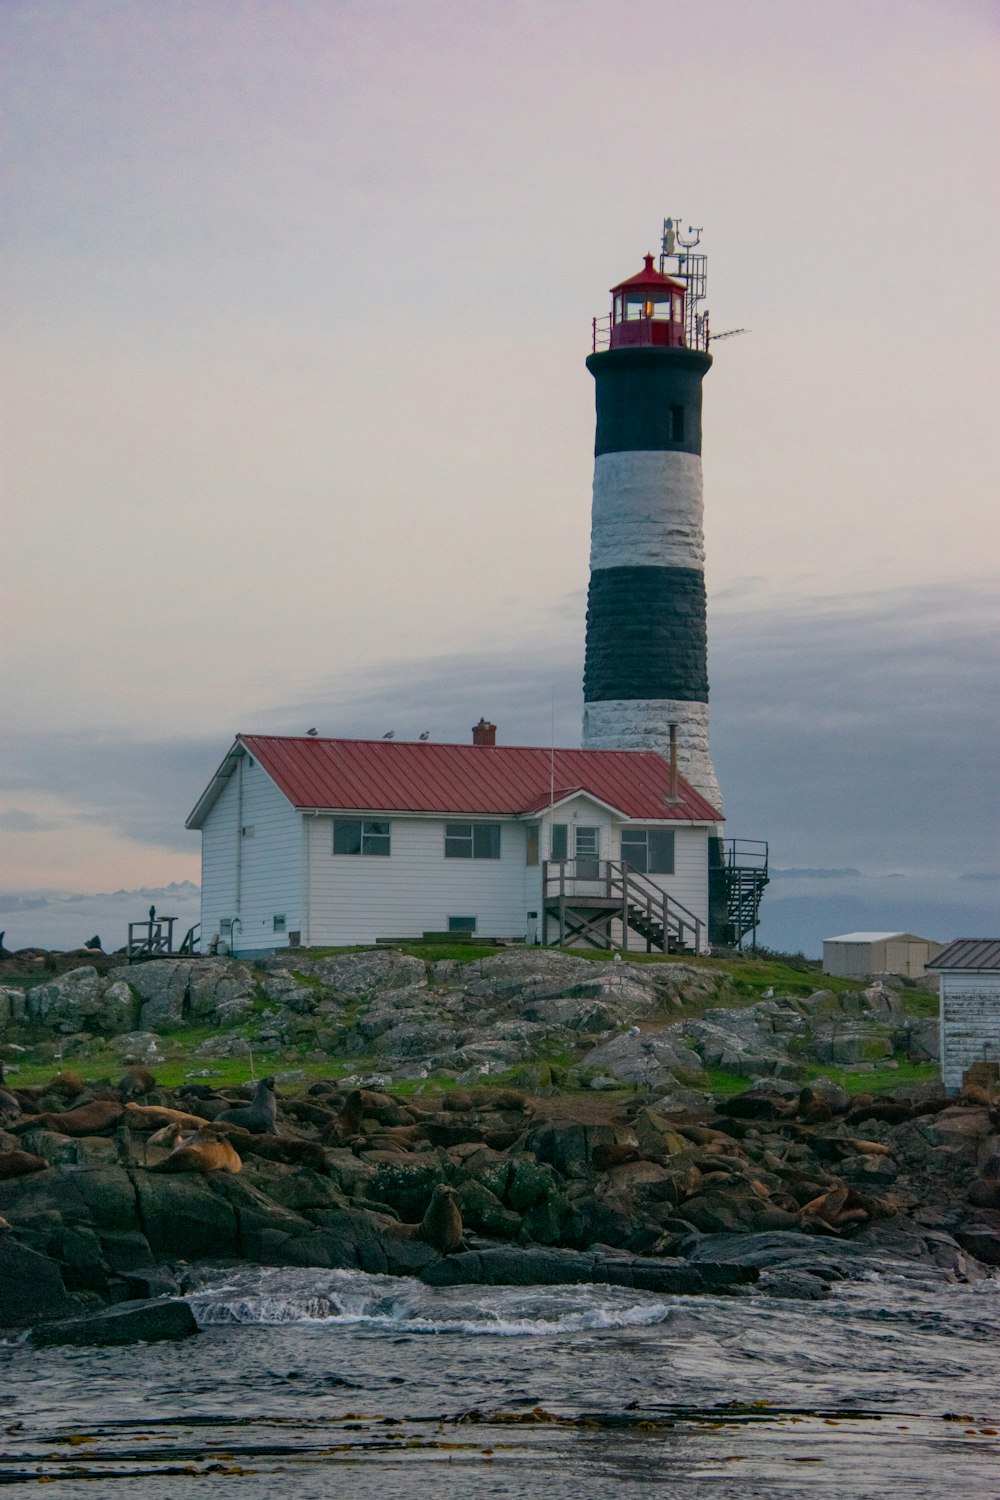 a lighthouse on a rocky shore with a red roof